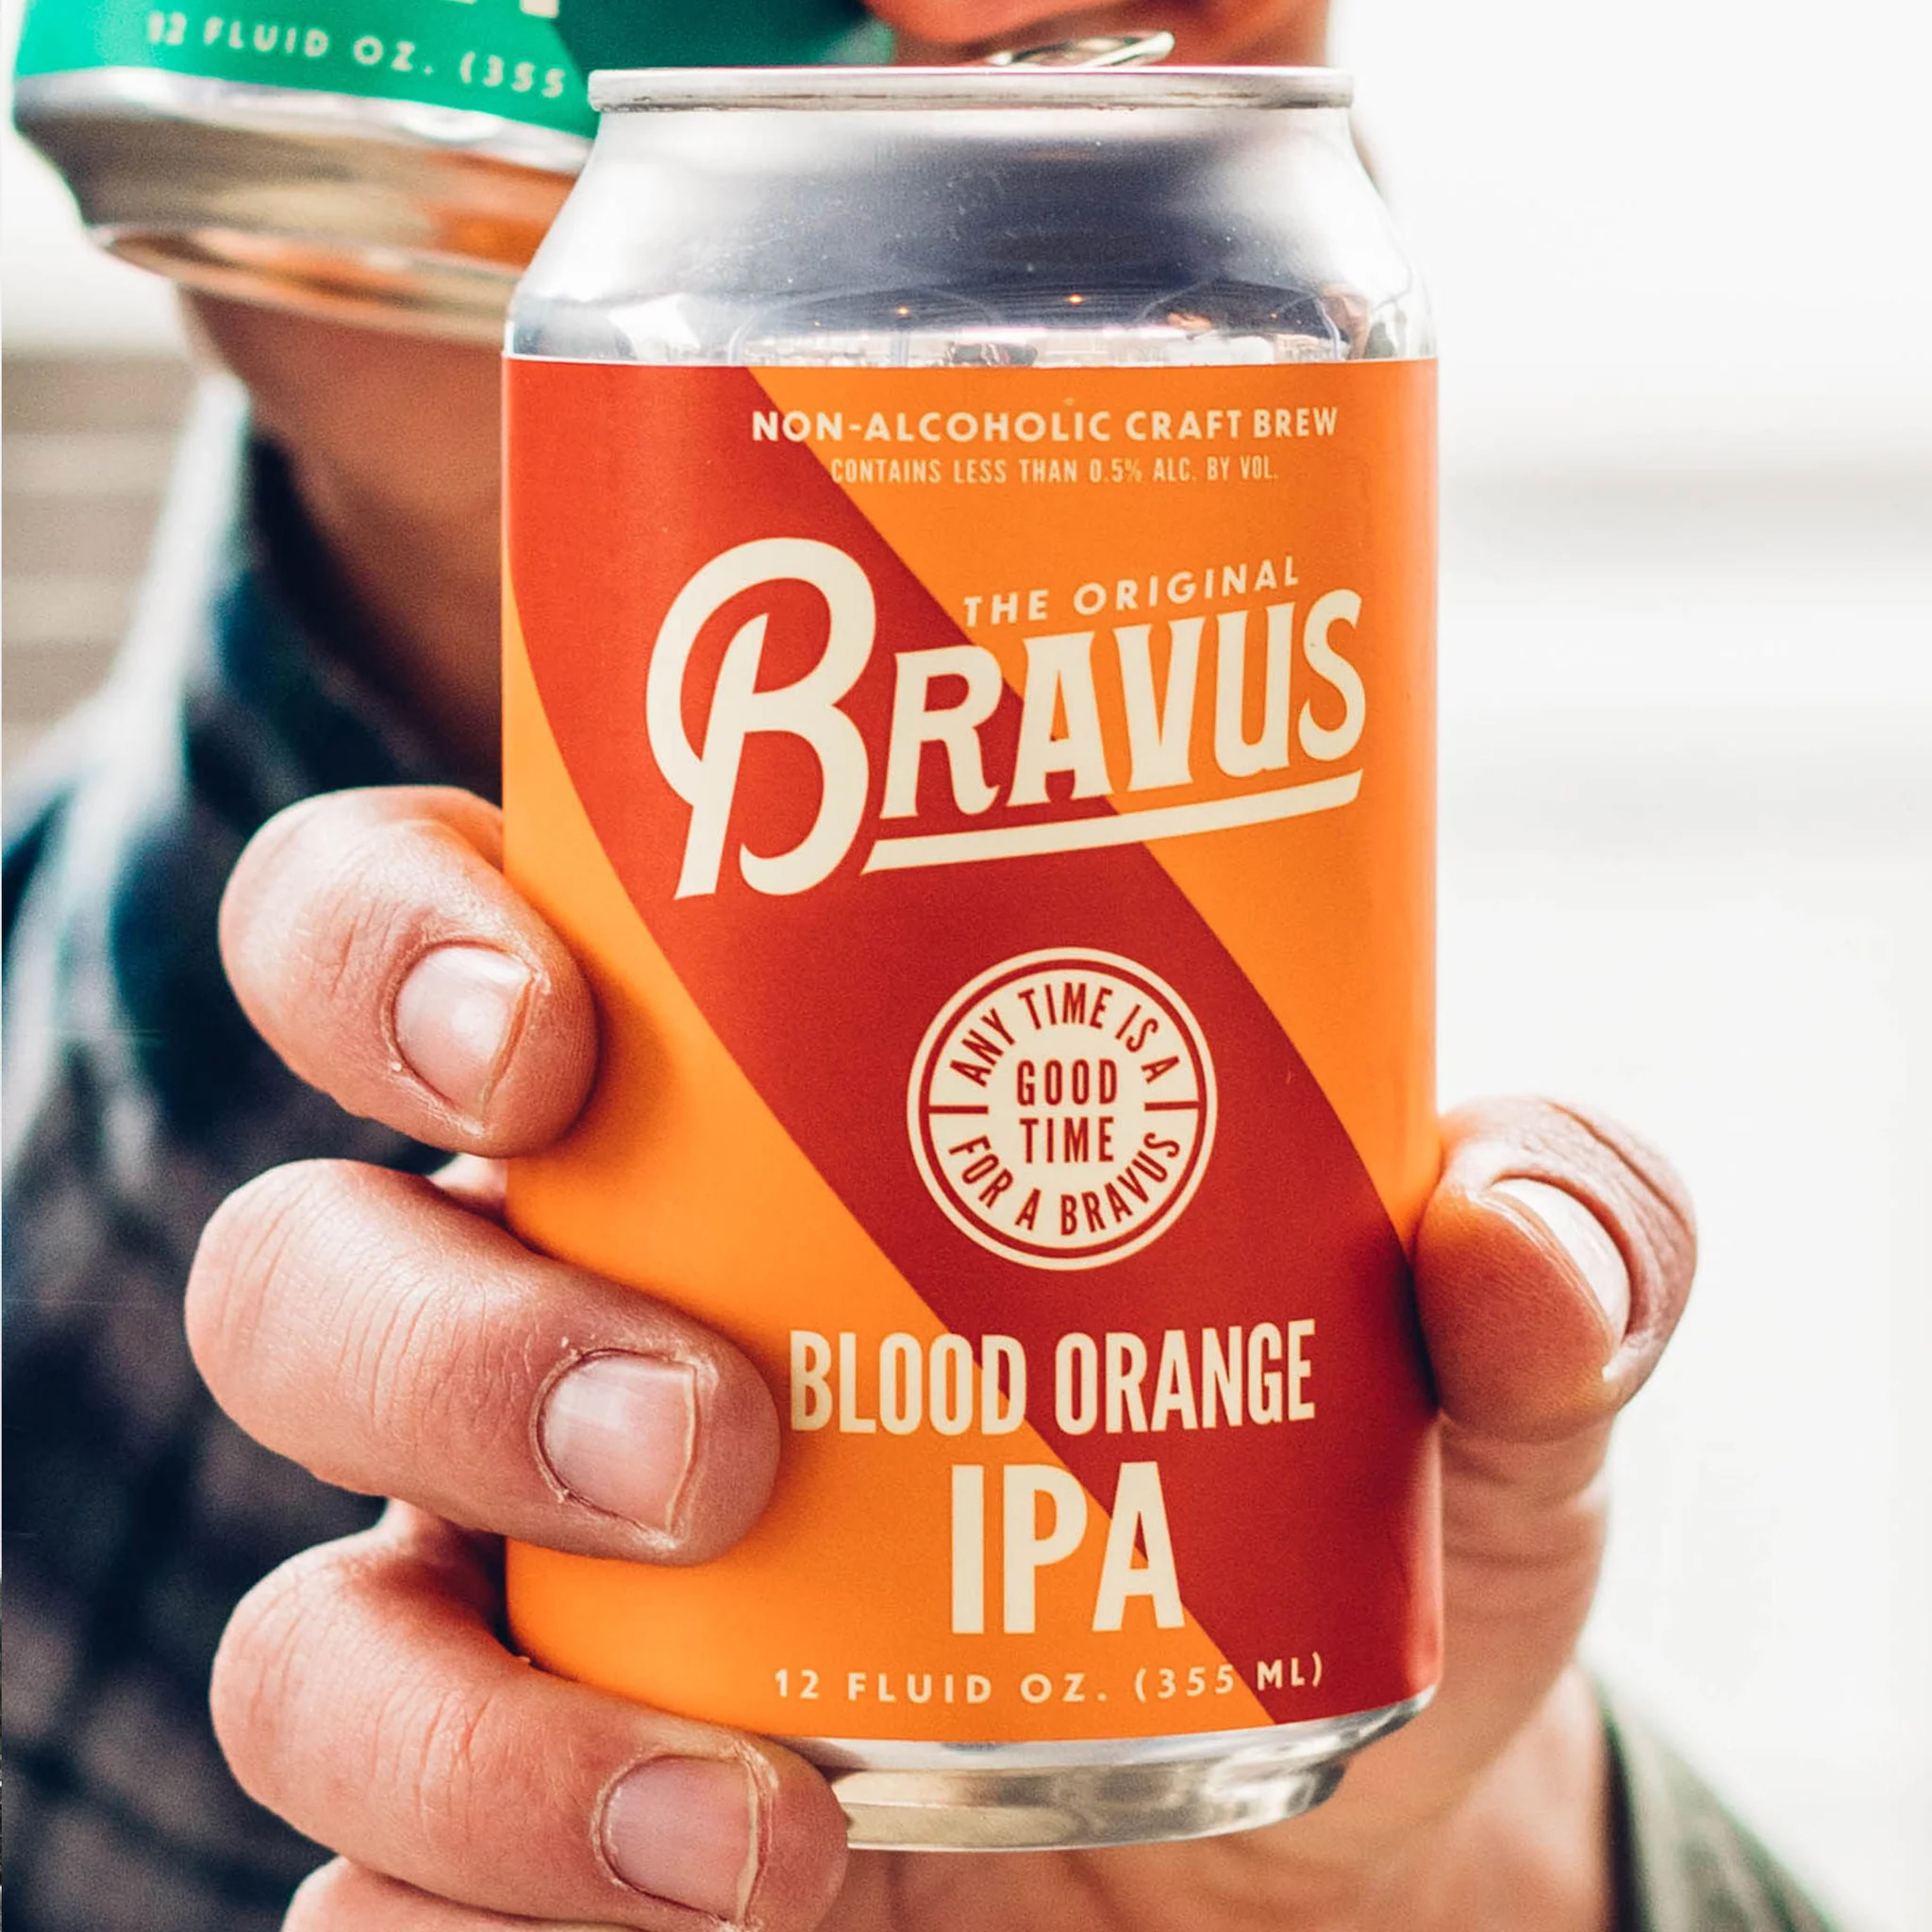 A close up of a hand holding a can of Bravus Blood Orange IPA.